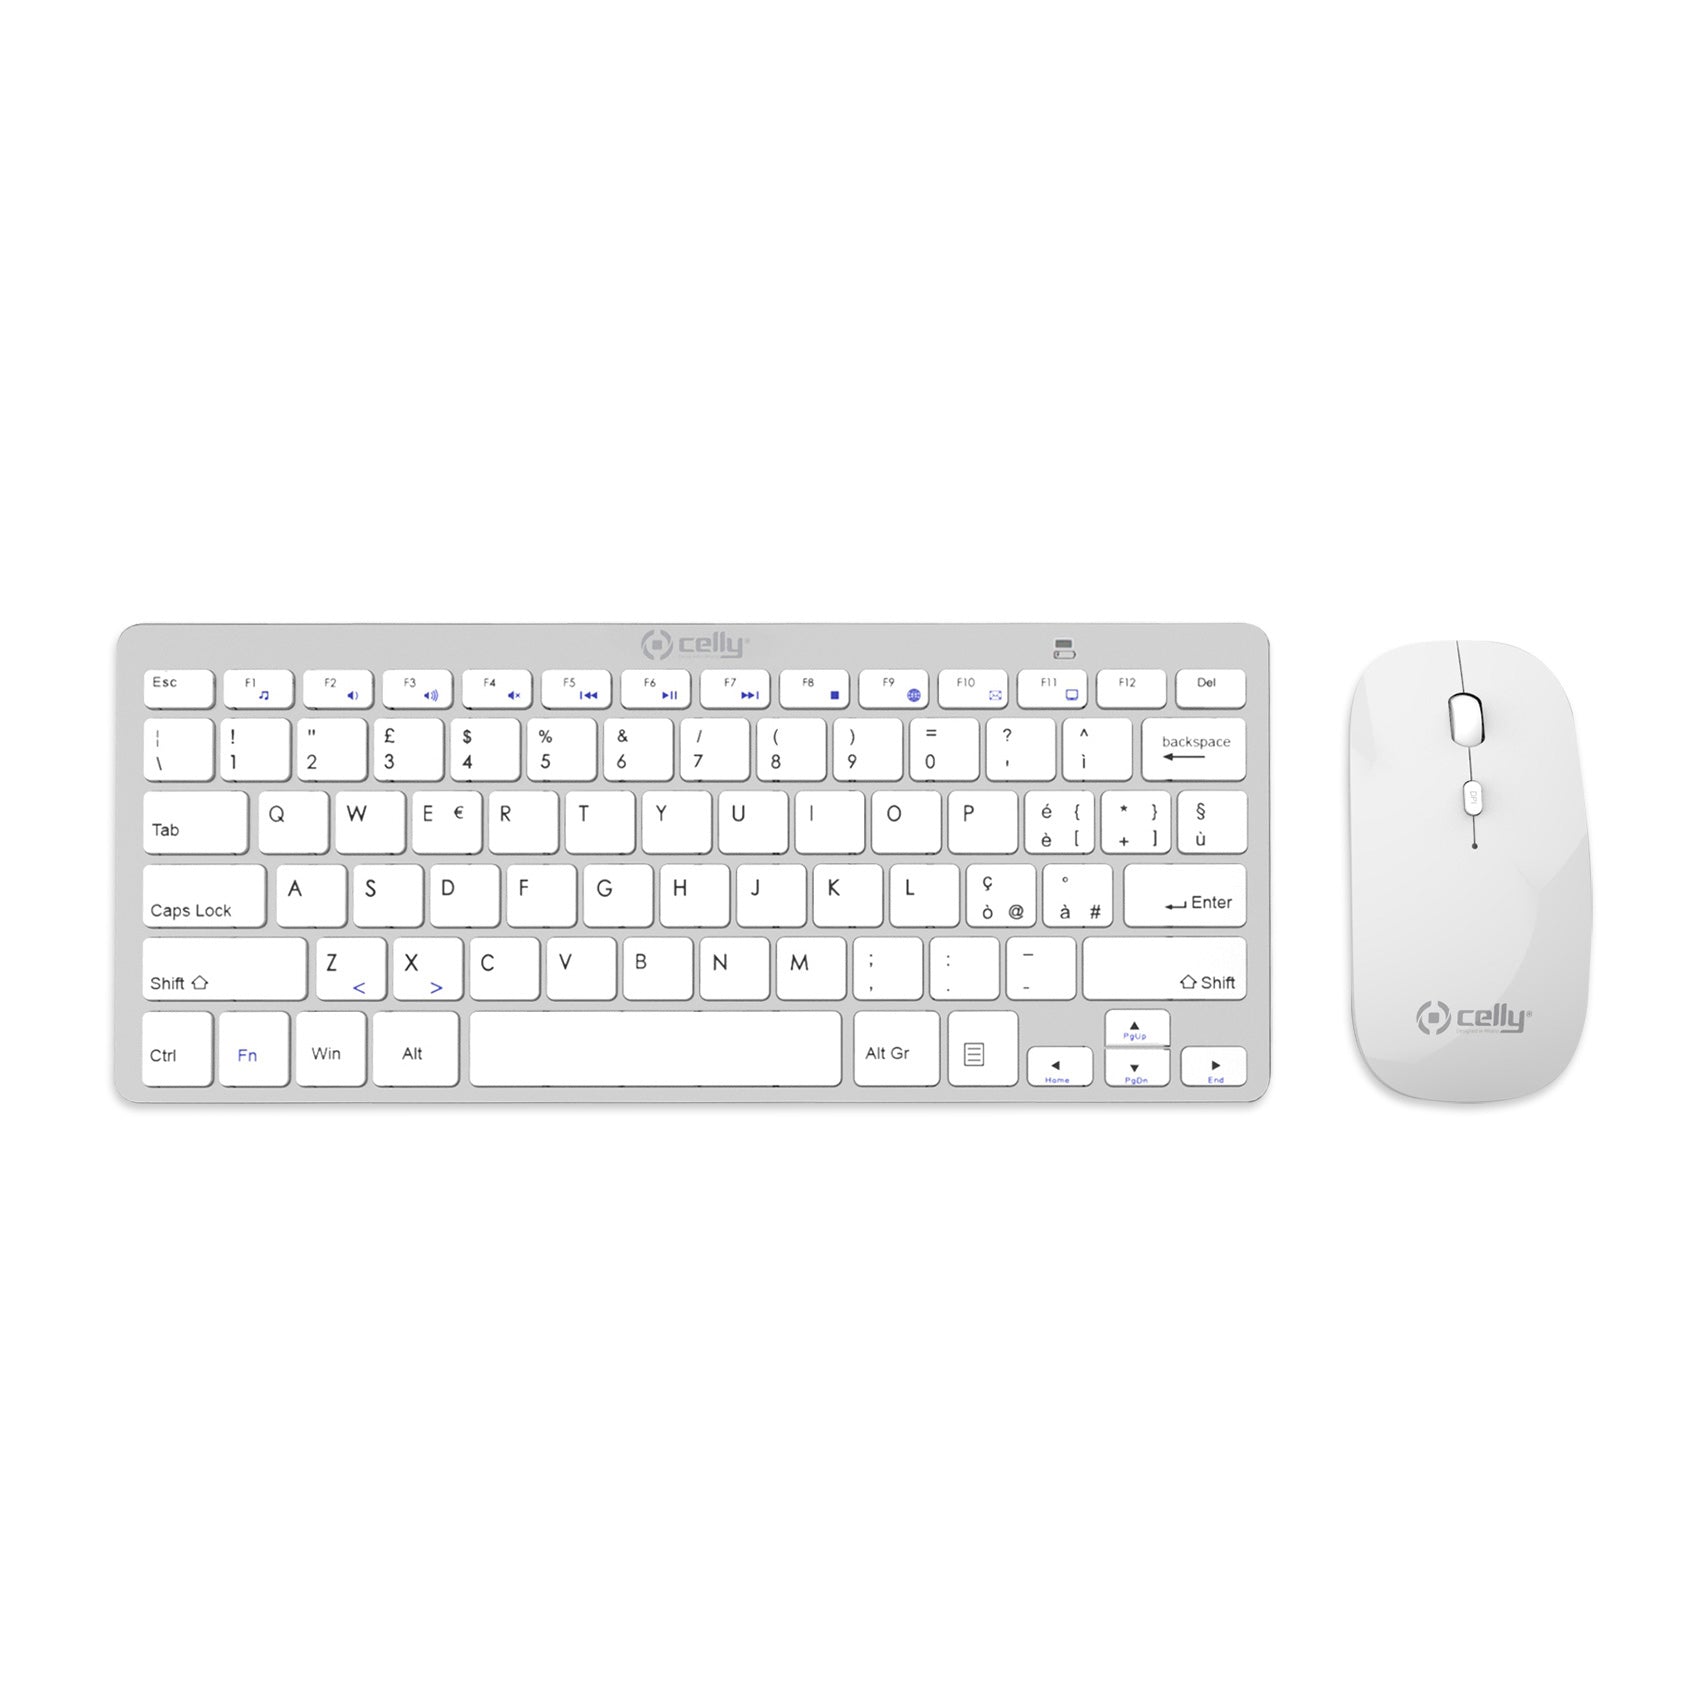 SW KEYBOARD+MOUSE BT DONGLE SILVER